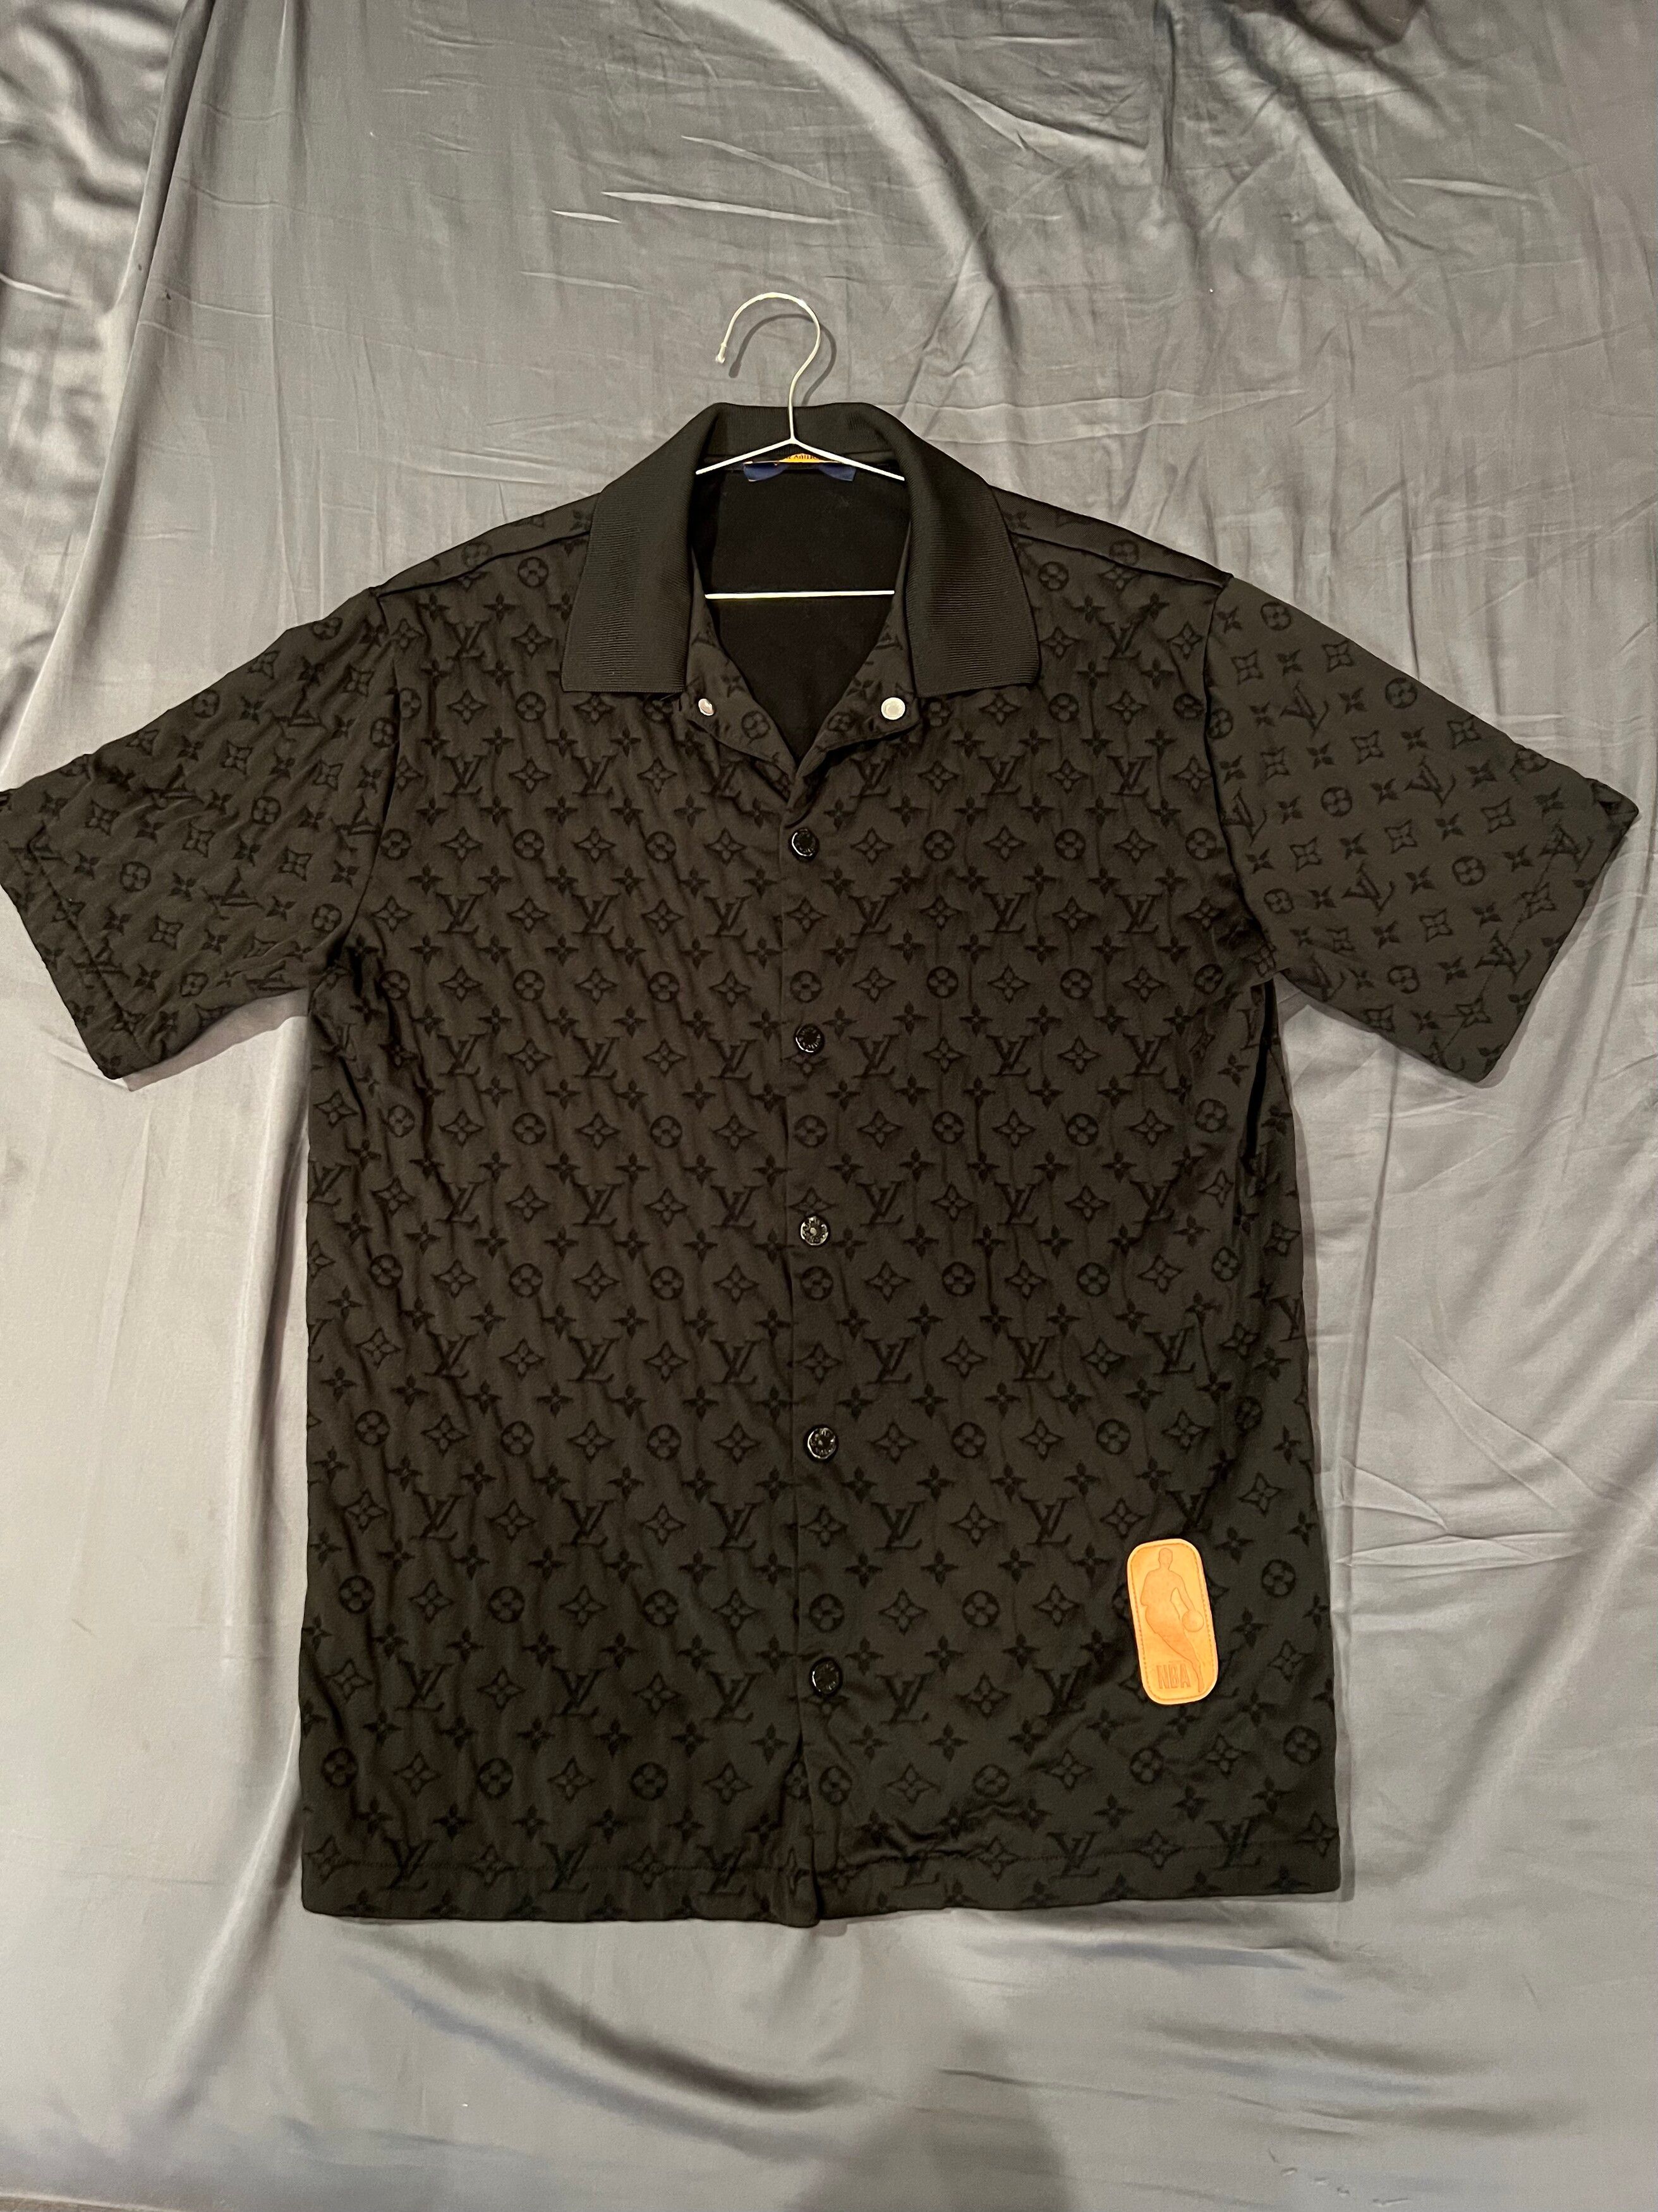 Louis Vuitton LVxNBA Monogram Buttoned Shirt, Black, S Inventory Check Required